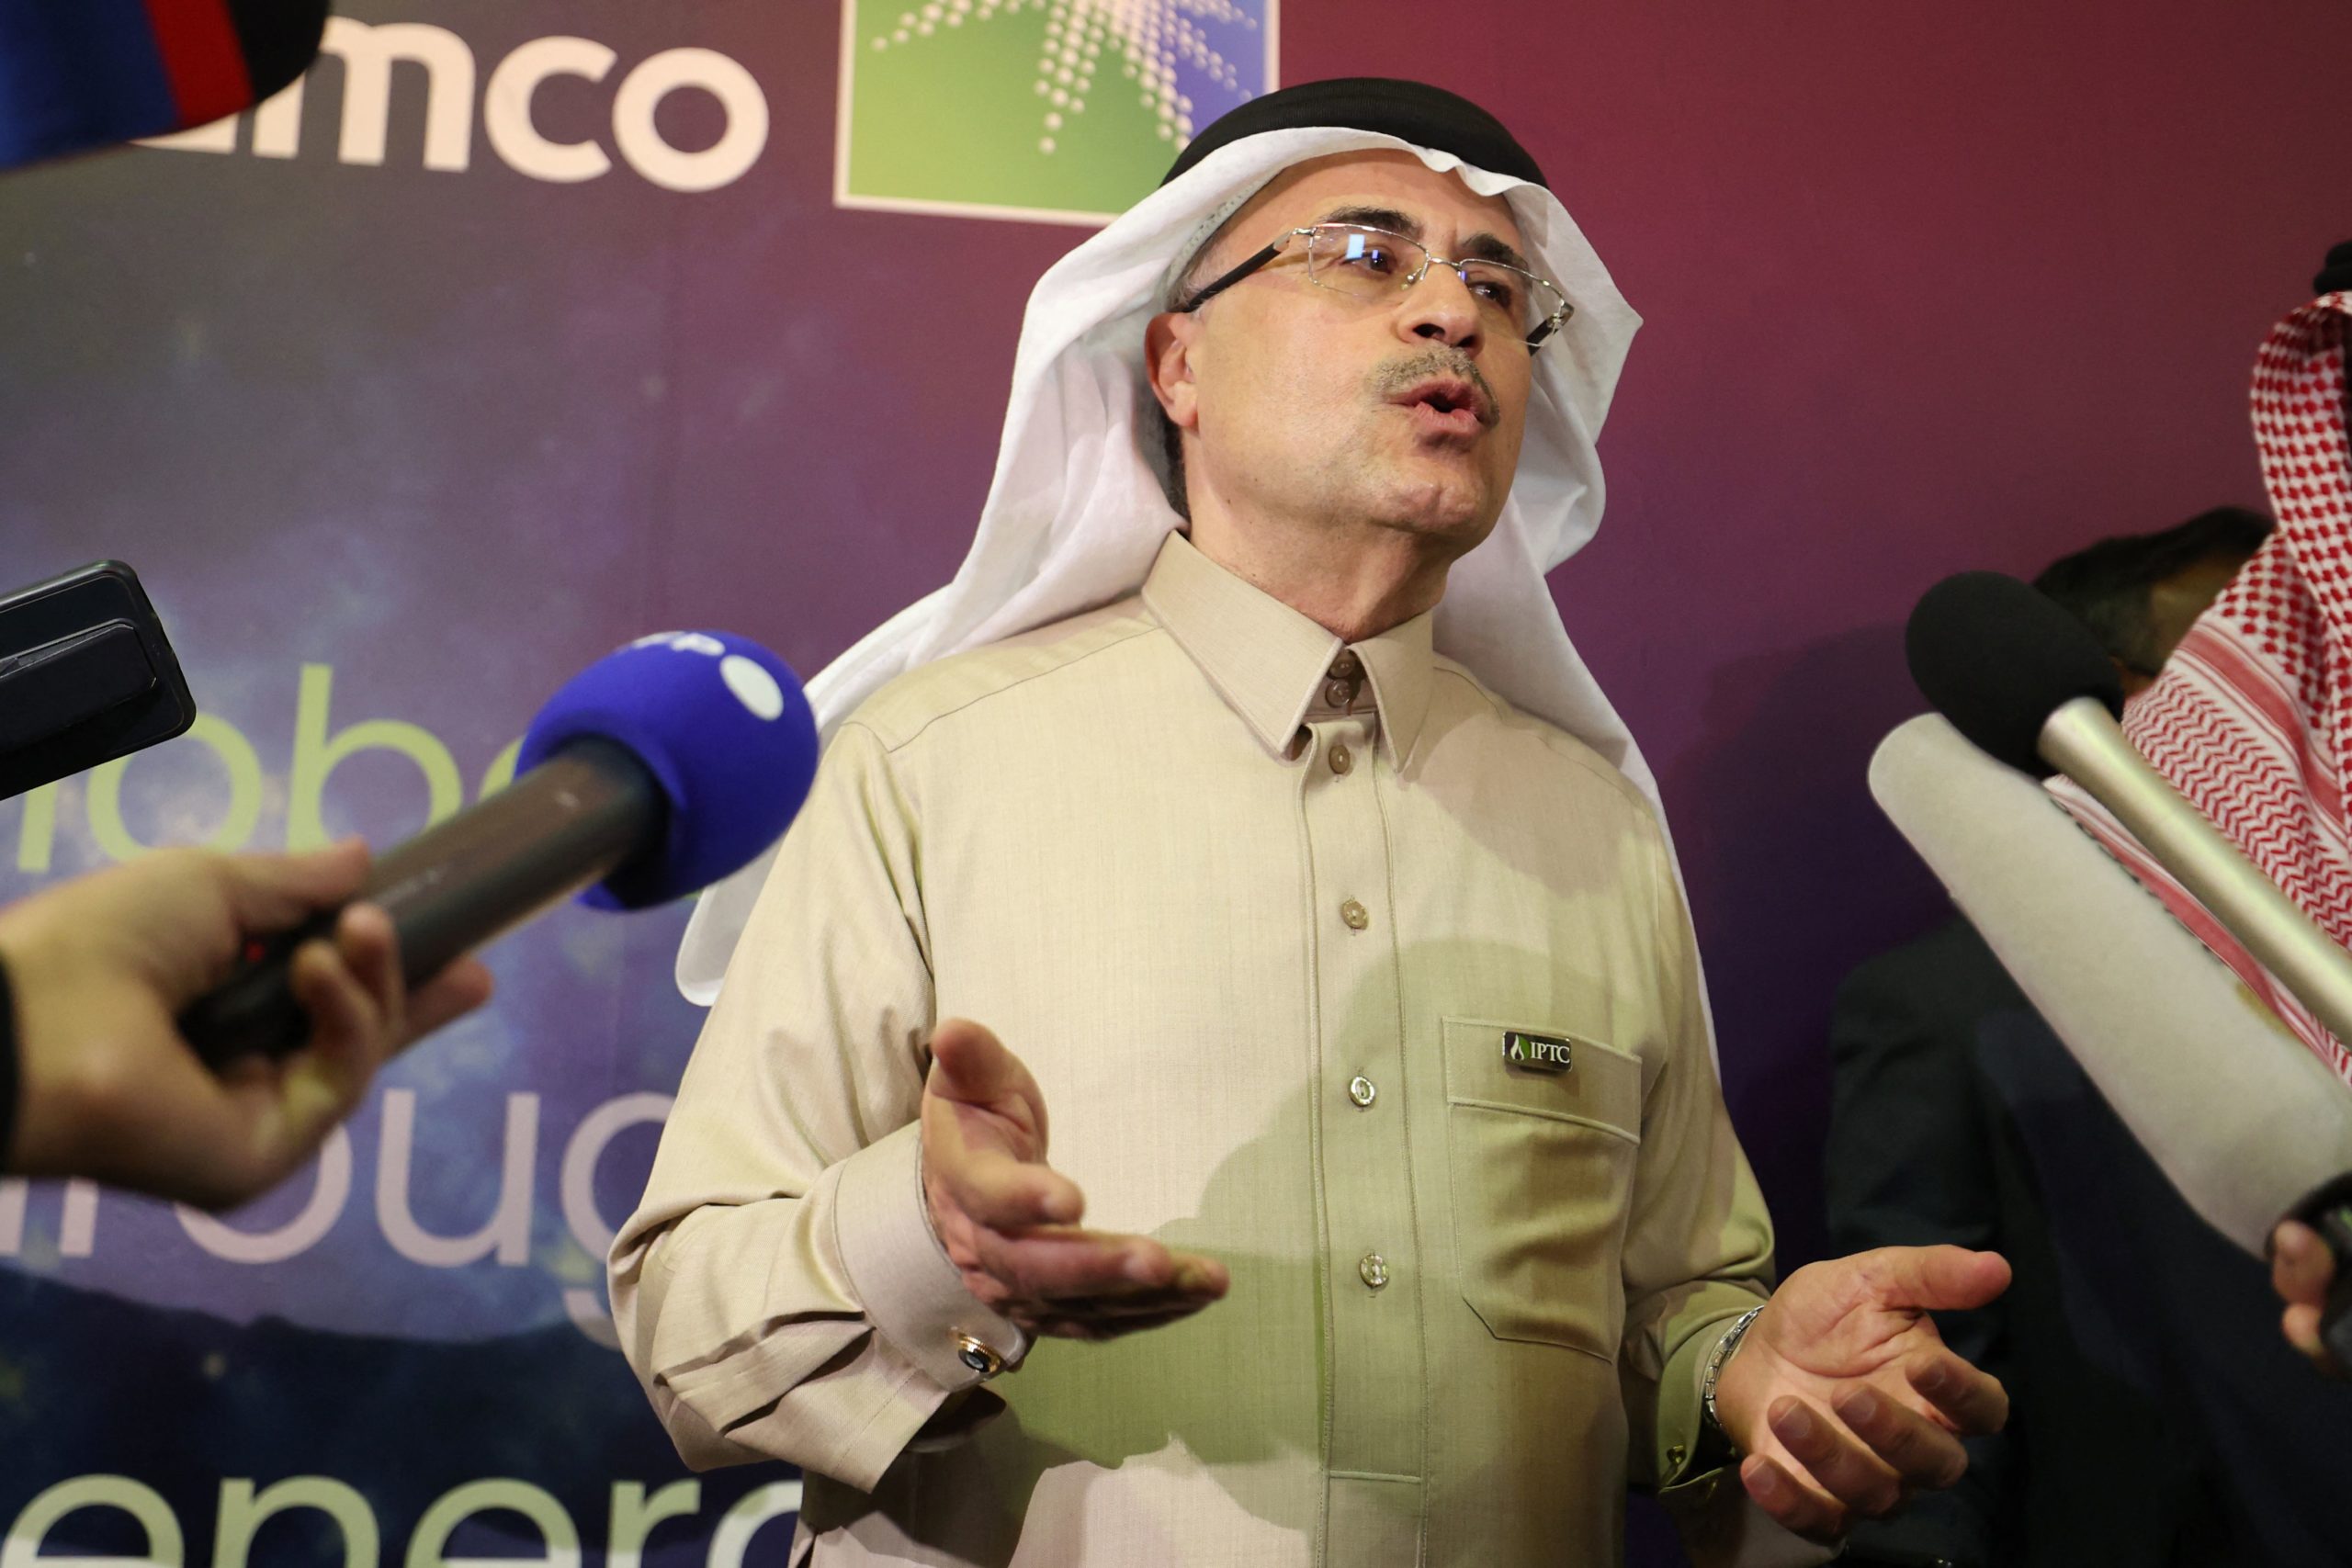 President and CEO of Saudi Aramco Amin Nasser addresses reporters at the opening ceremony of the International Petroleum Technology Conference (IPTC) in Riyadh, on February 21, 2022. (Photo by FAYEZ NURELDINE/AFP via Getty Images)